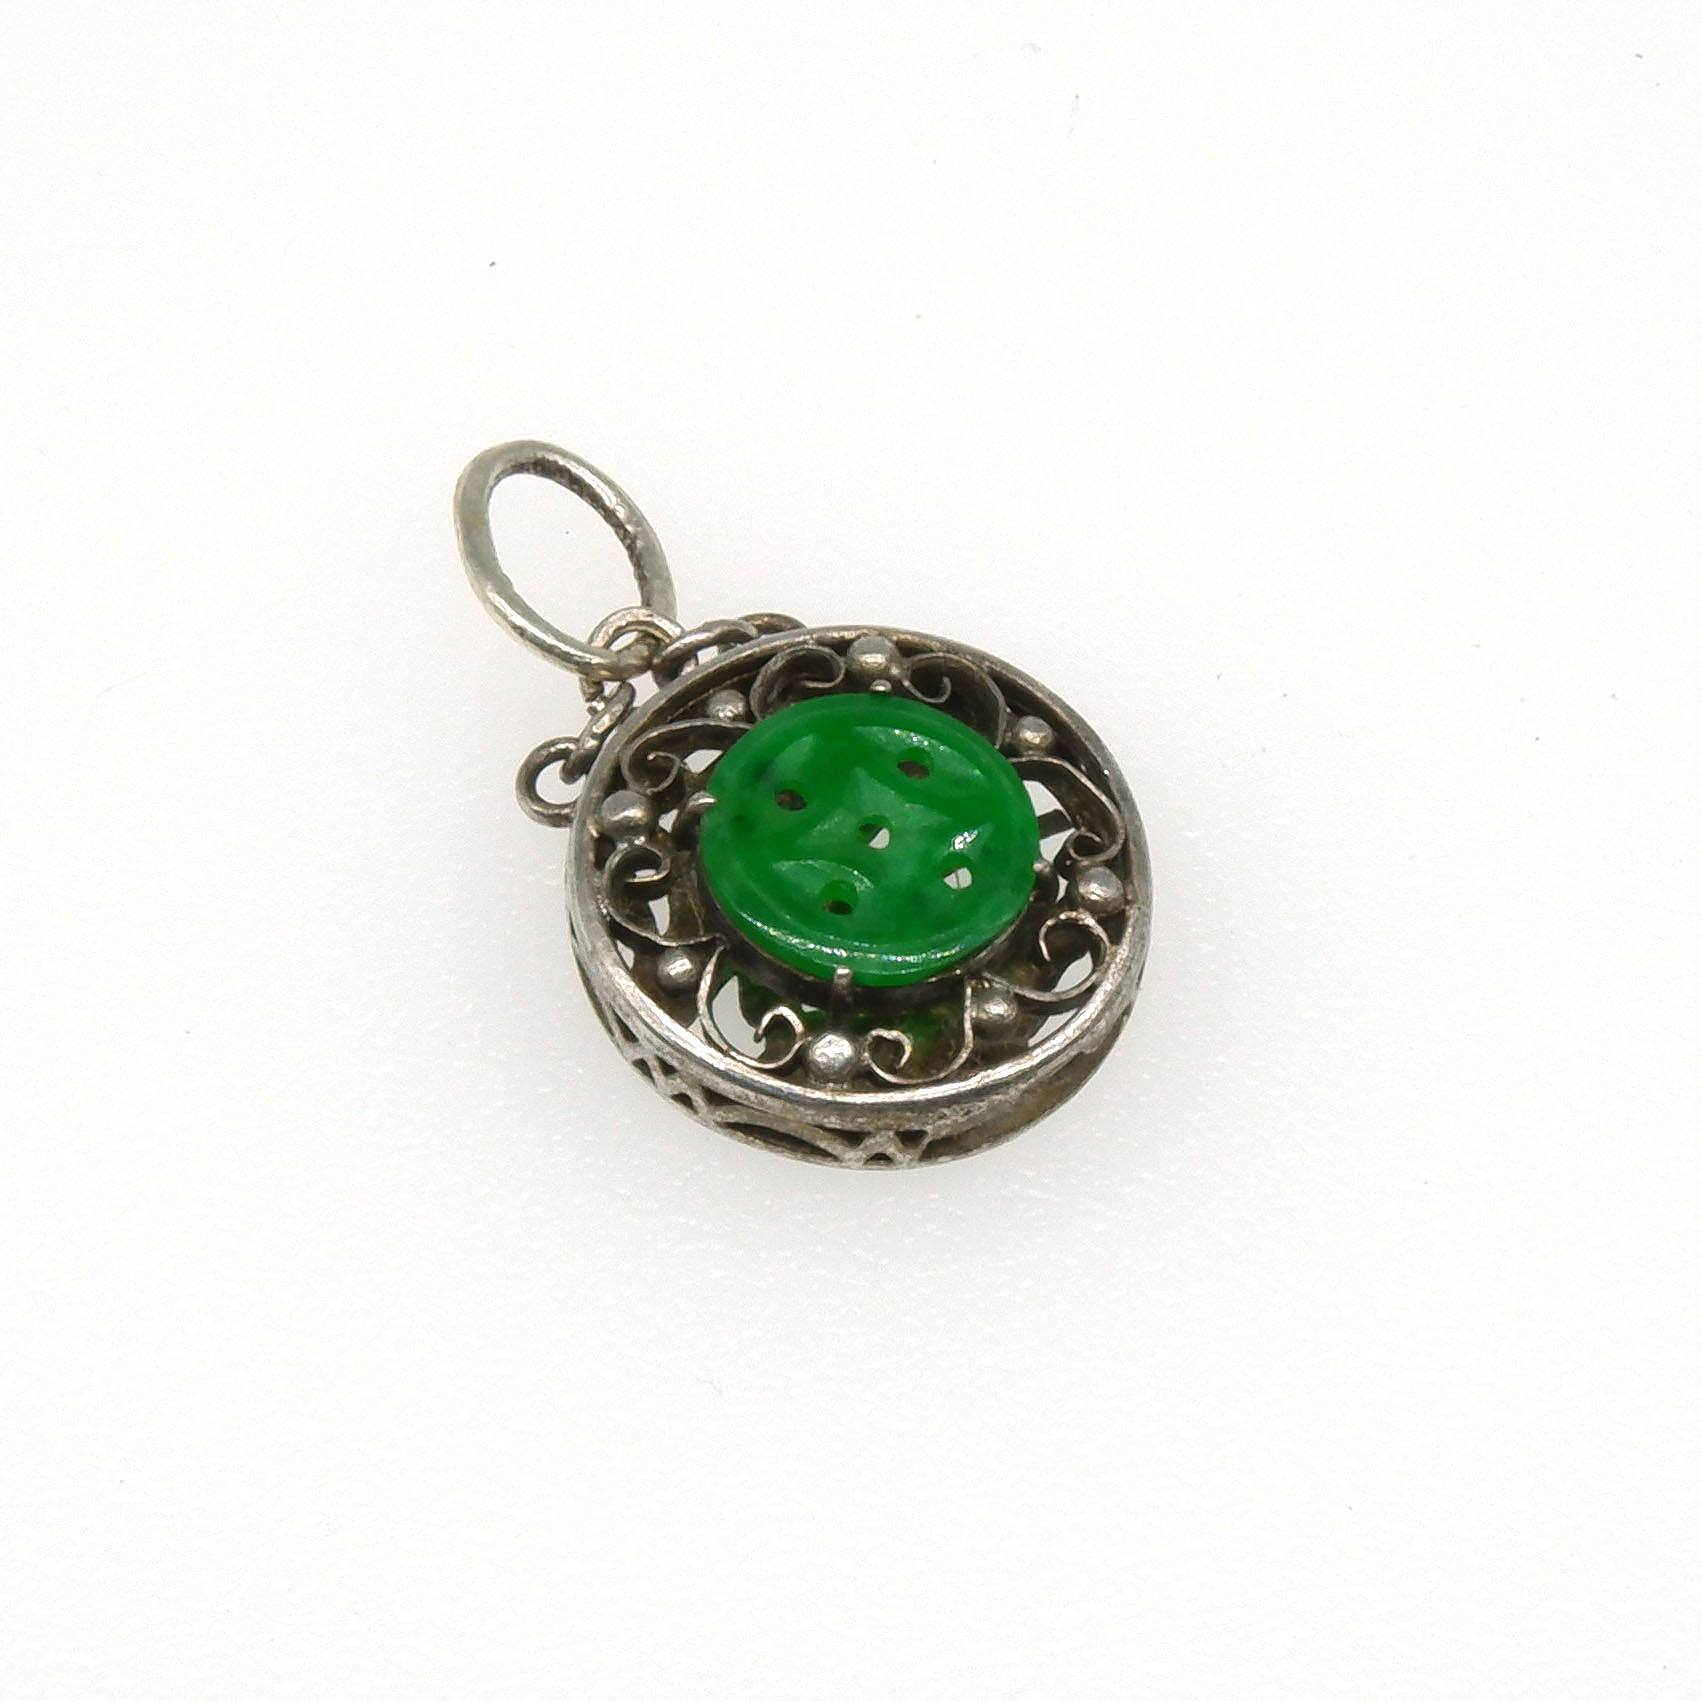 '14ct White Gold Round Fancy Box Pendant with Engraved Finish with Centre of Flat Button of Carved Jadeite on a Silver Scroll Chain'